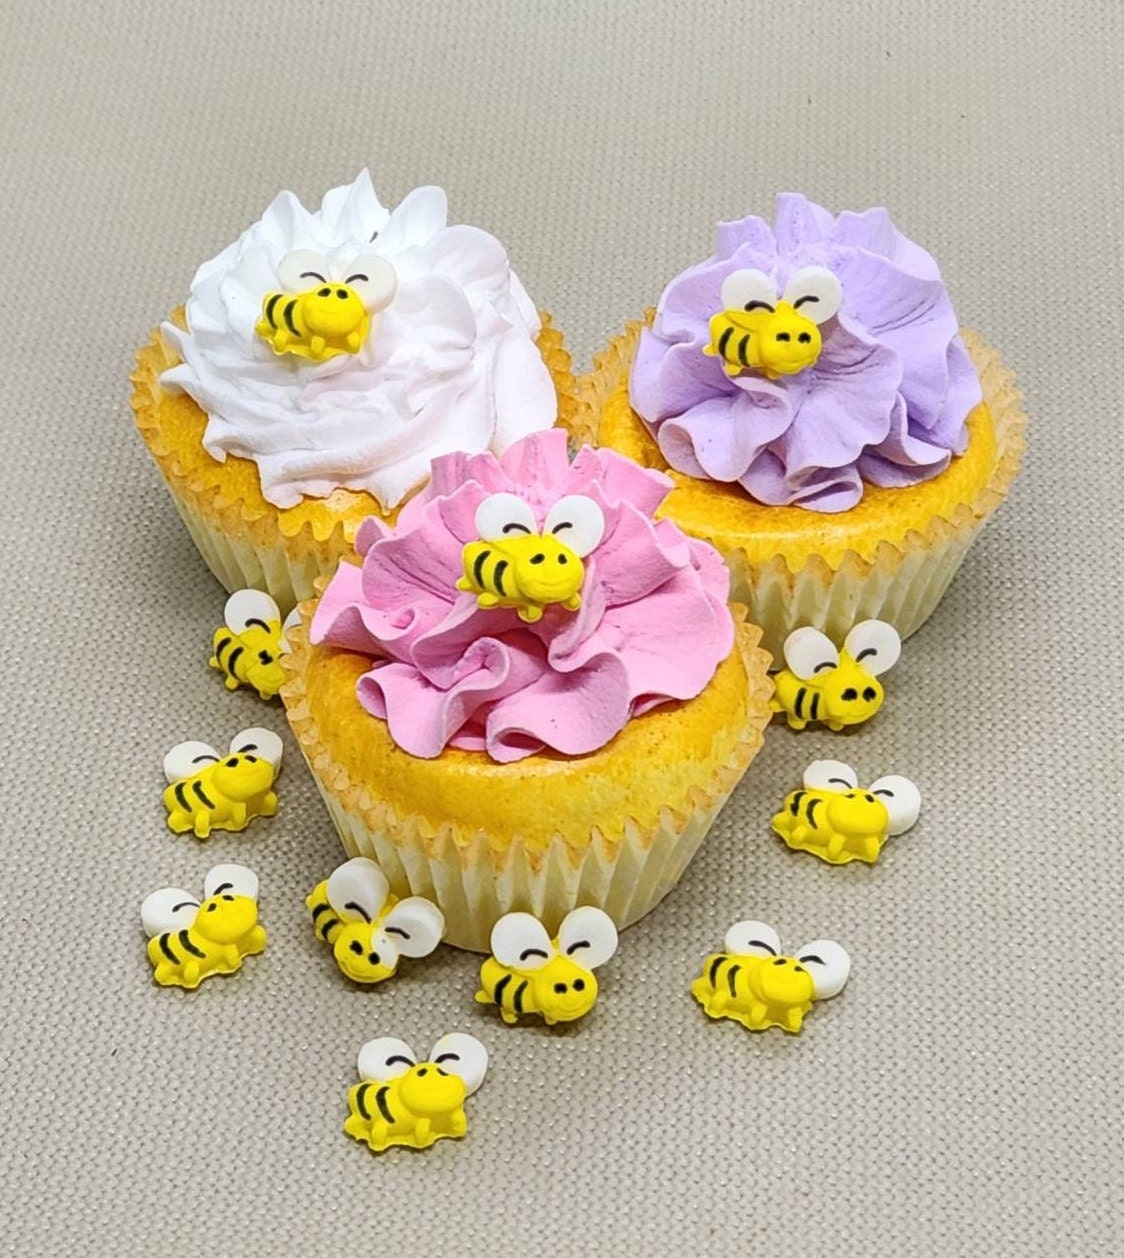 Oasis Supply Sugar Bumble Bees Cake Decorations, 12 Count